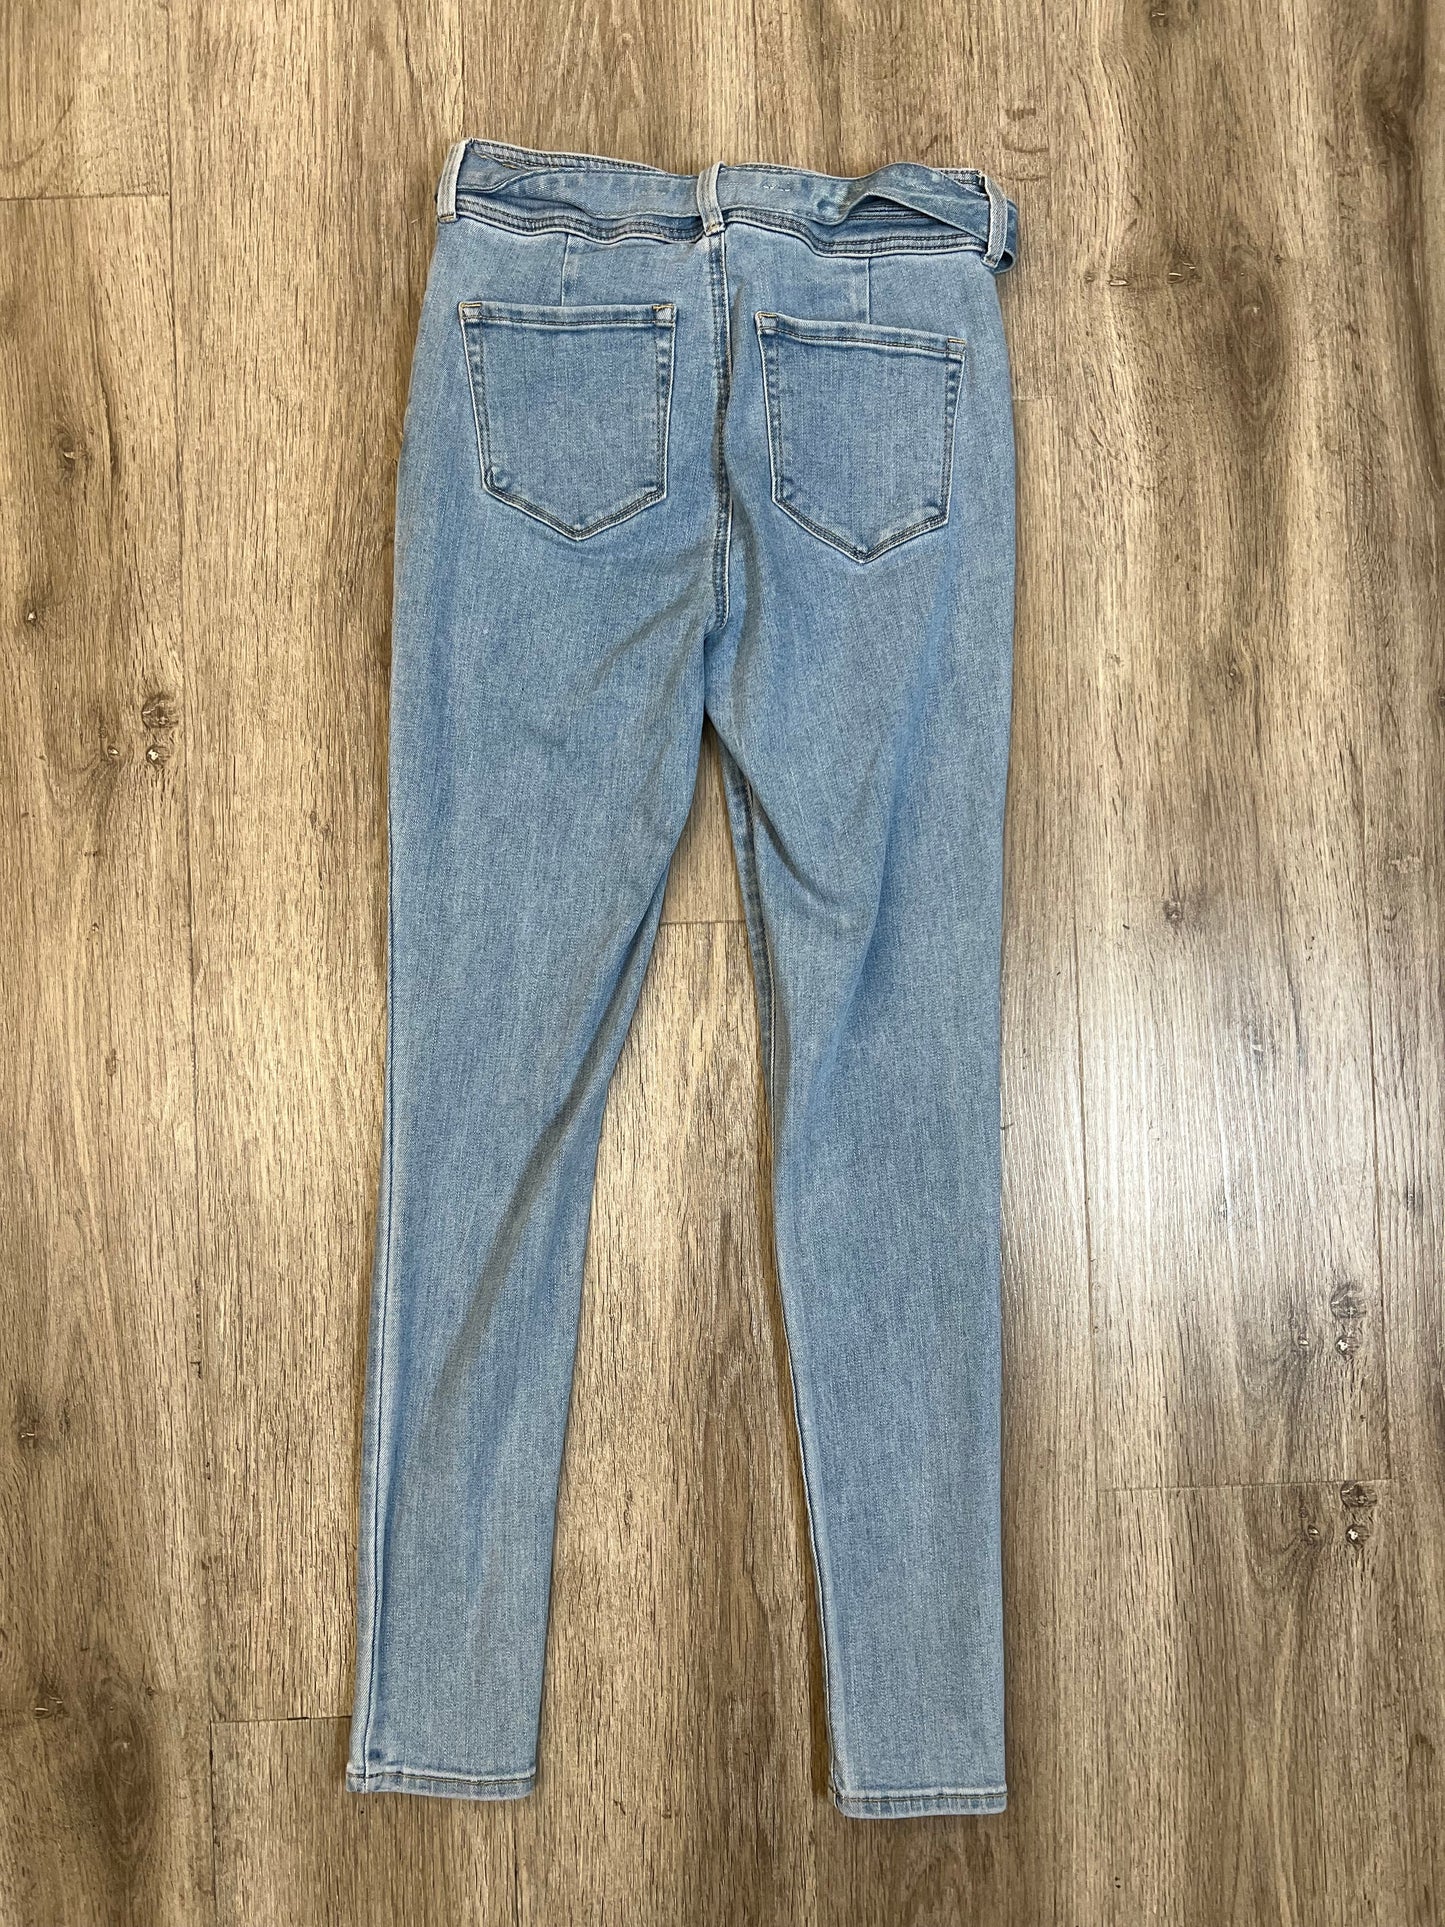 Jeans Skinny By Pacsun  Size: 26